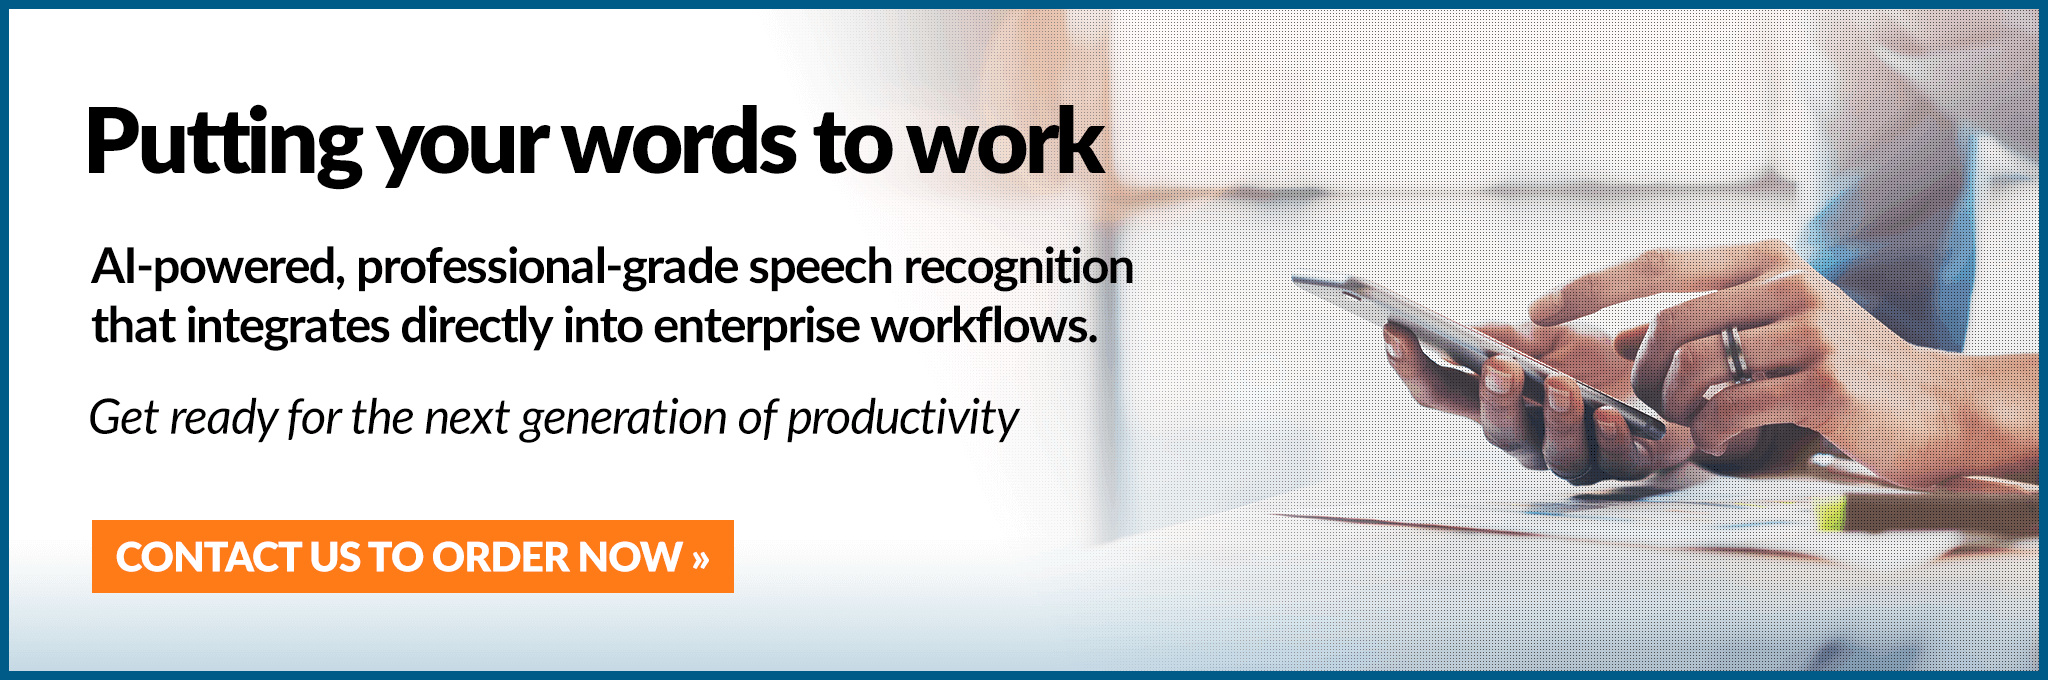 Putting your words to work. AI-powered, professional-grade speech recognitionthat integrates directly into enterprise workflows. Get ready for the next generation of productivity.